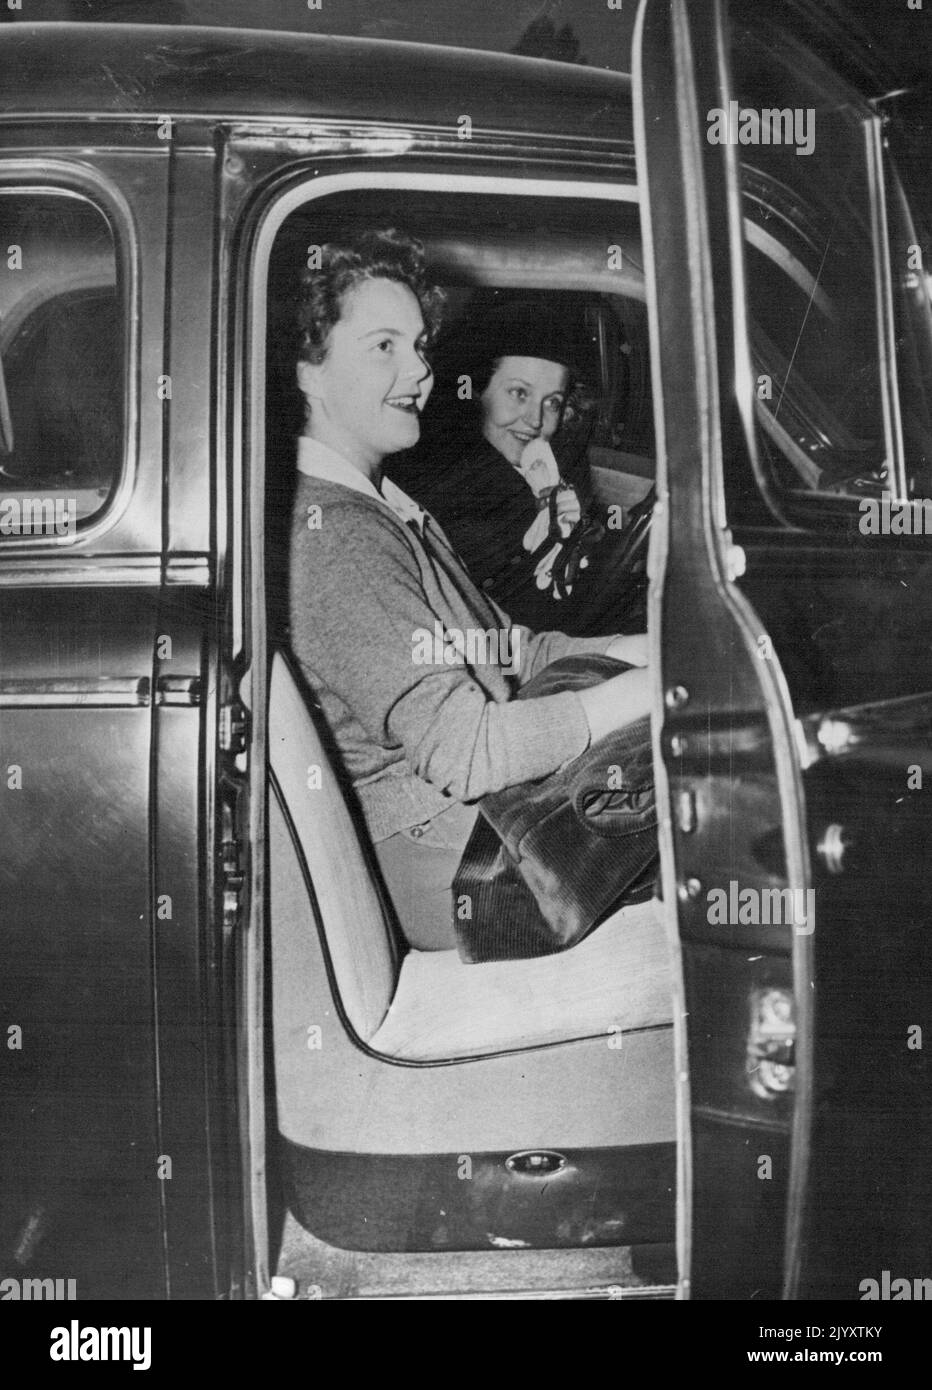 Italian Ex-King ***** in Geneva Princess Maria Pia. eldest daughter of Umberto of Savoy, ex-King of Italy, photographed in the ex-King's car at Geneva, where he has arrived to stay for a few days with his wife at the Castle of Merlinge. October 30, 1950. (Photo by Paul Popper Ltd.) Stock Photo